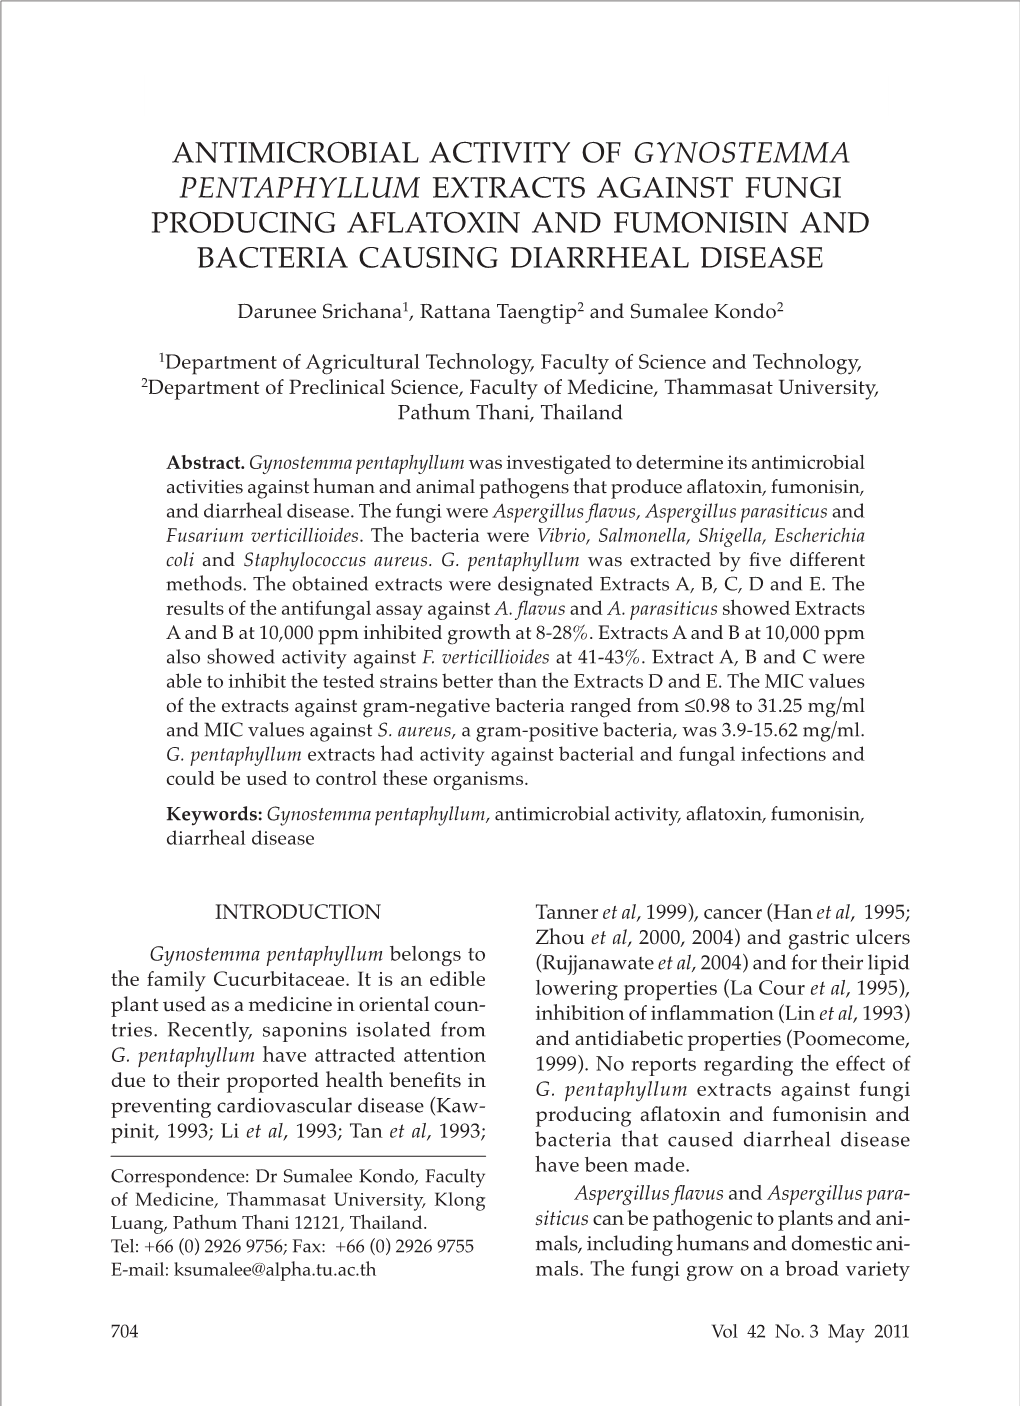 Antimicrobial Activity of Gynostemma Pentaphyllum Extracts Against Fungi Producing Aflatoxin and Fumonisin and Bacteria Causing Diarrheal Disease